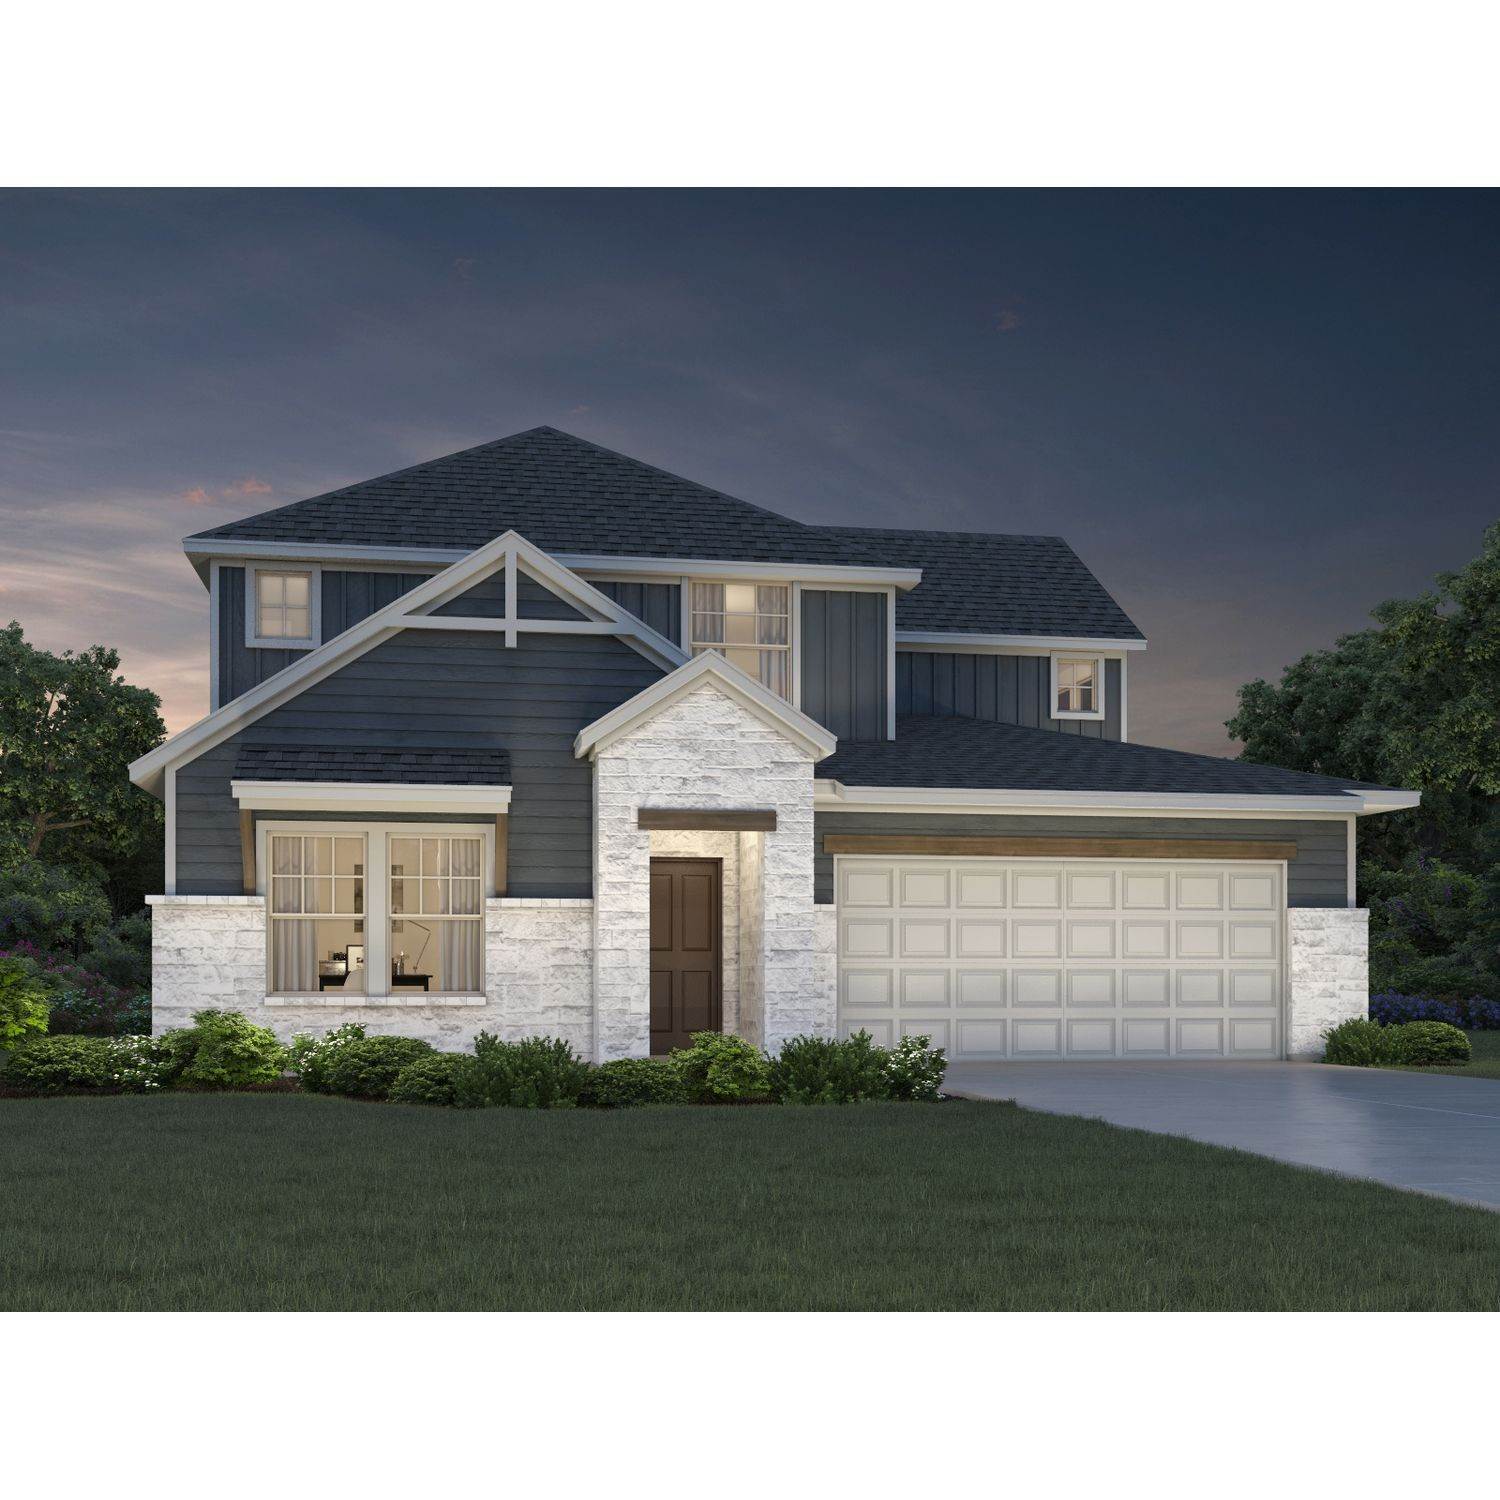 Single Family for Sale at Riverbend At Double Eagle - Boulevard Collection 102 Short Toed Swoop, Cedar Creek, TX 78612